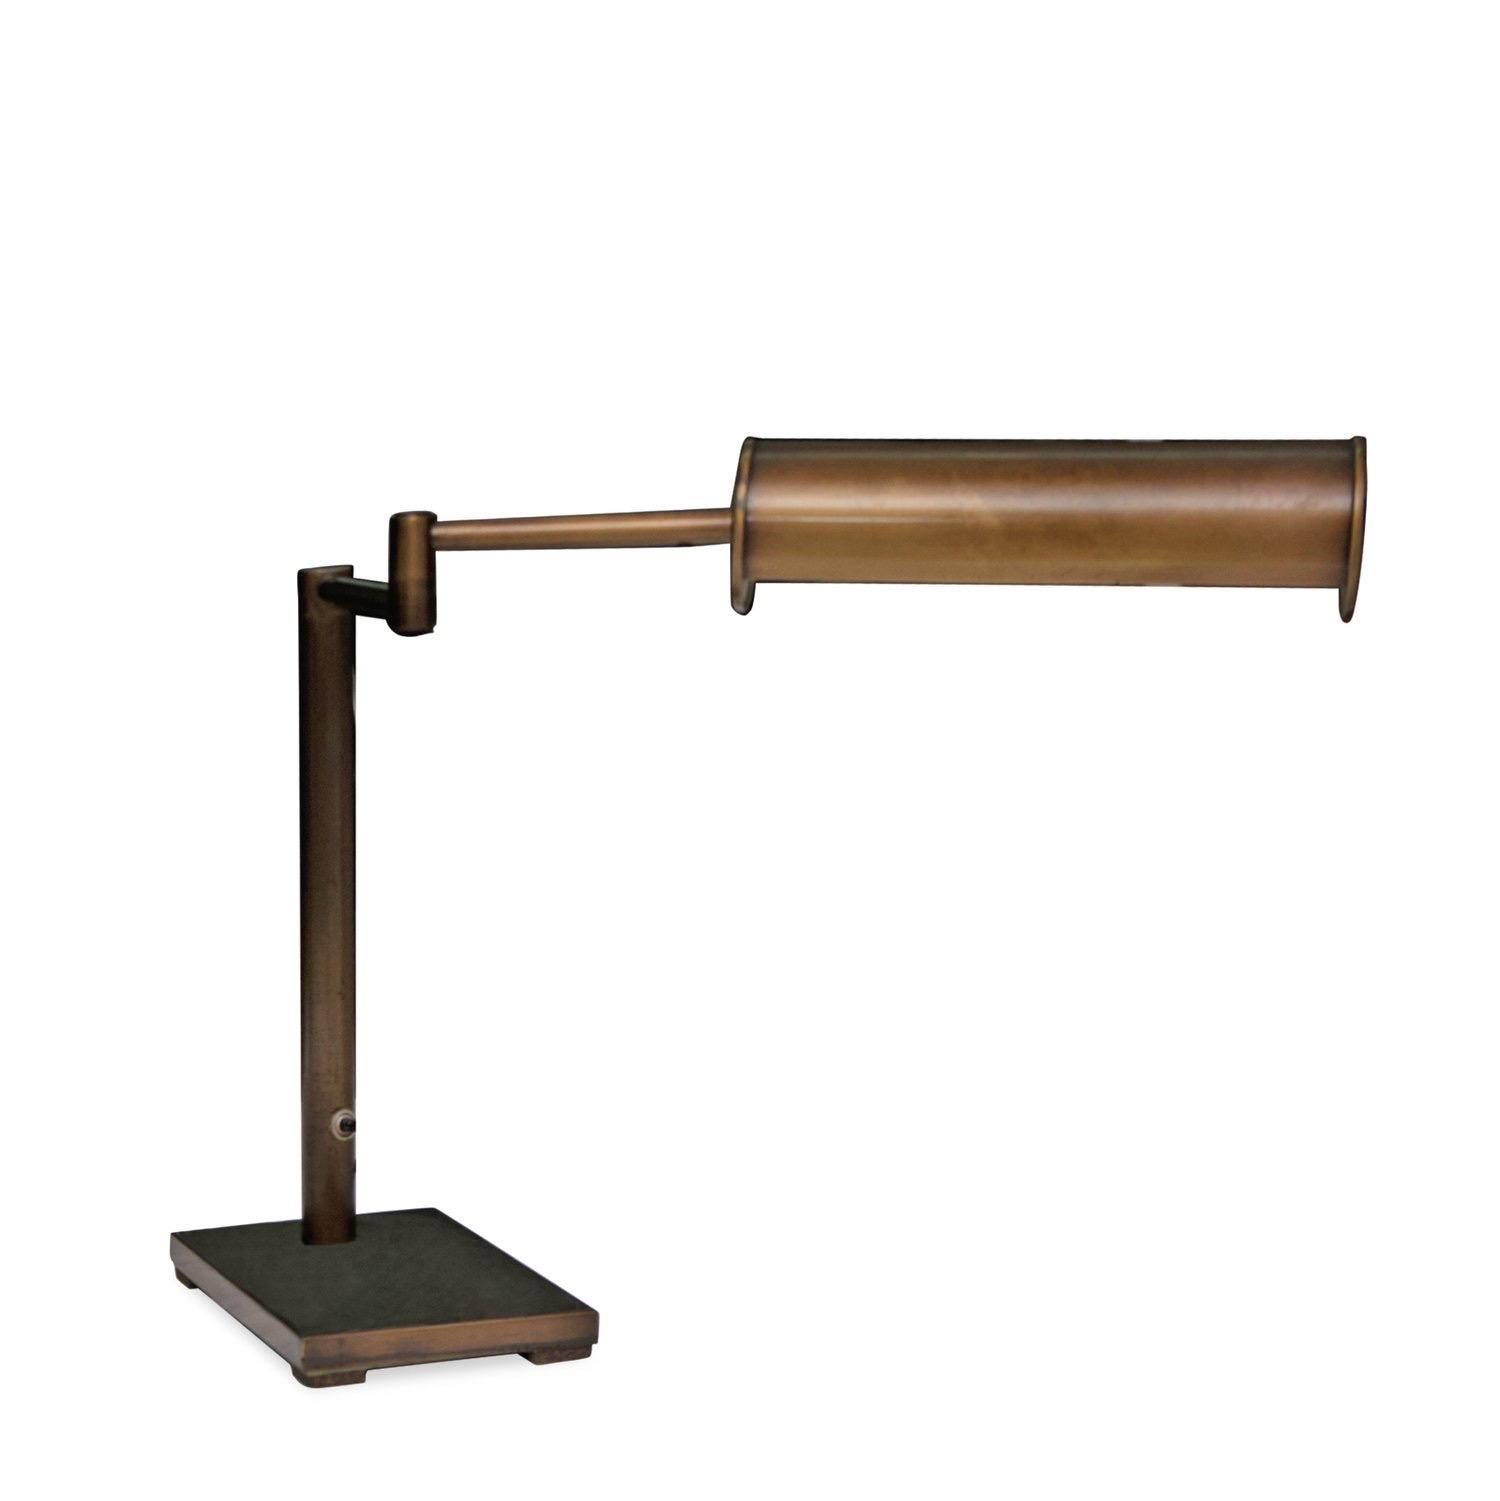 Walter Von Nessen by Nessen Studio / library table lamp in antiqued brass finish.

USA, circa 1970.

Features a swing arm and pivoting, perforated, cylindrical shade.  Complemented by natural aged patina and minor age-commensurate